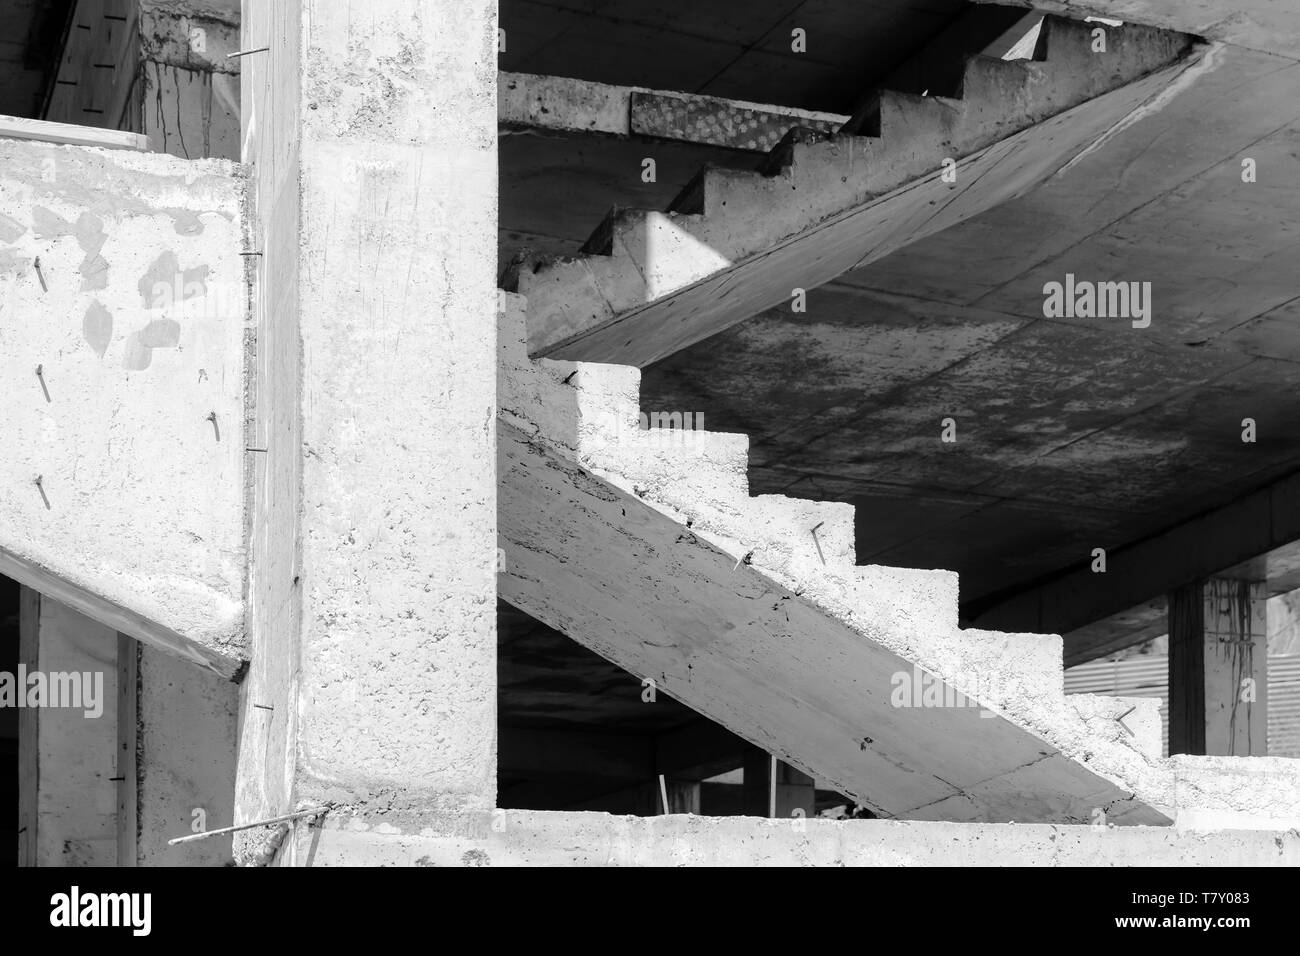 Abstract industrial architecture fragment, white concrete columns and stairs under construction Stock Photo